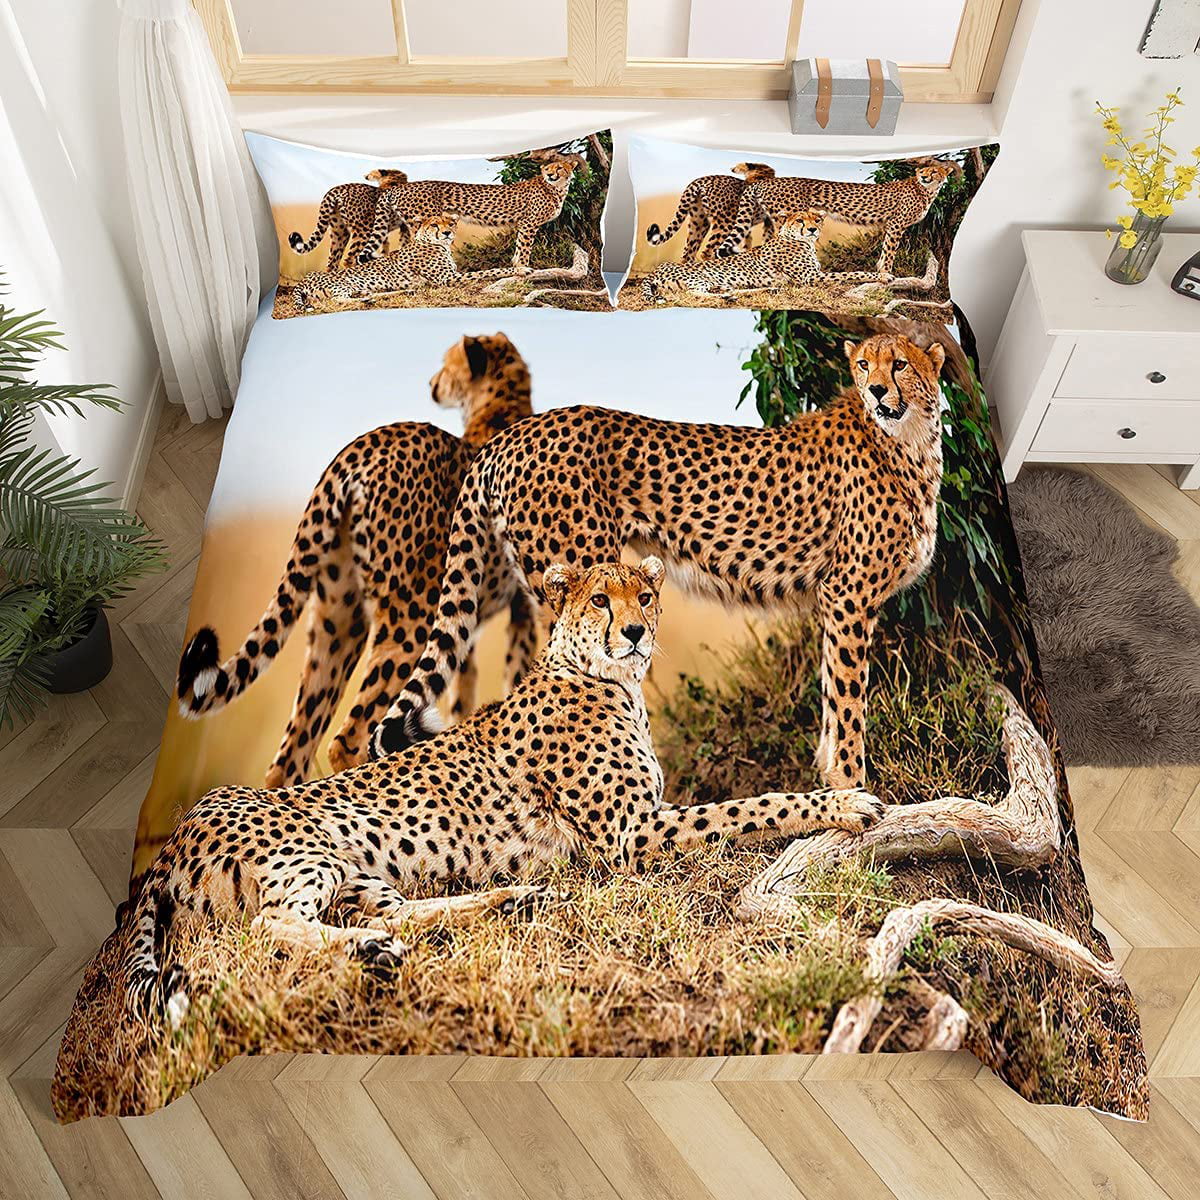 Leopard Bed Sheets Safari Cheetah Bed Sheet Set for Kids Boys Girls Women Colorful Leaves Animal Decor Bedding Set Wildlife Style Decor Fitted Sheet with 1 Pillowcase 2Pcs Bedding Single 